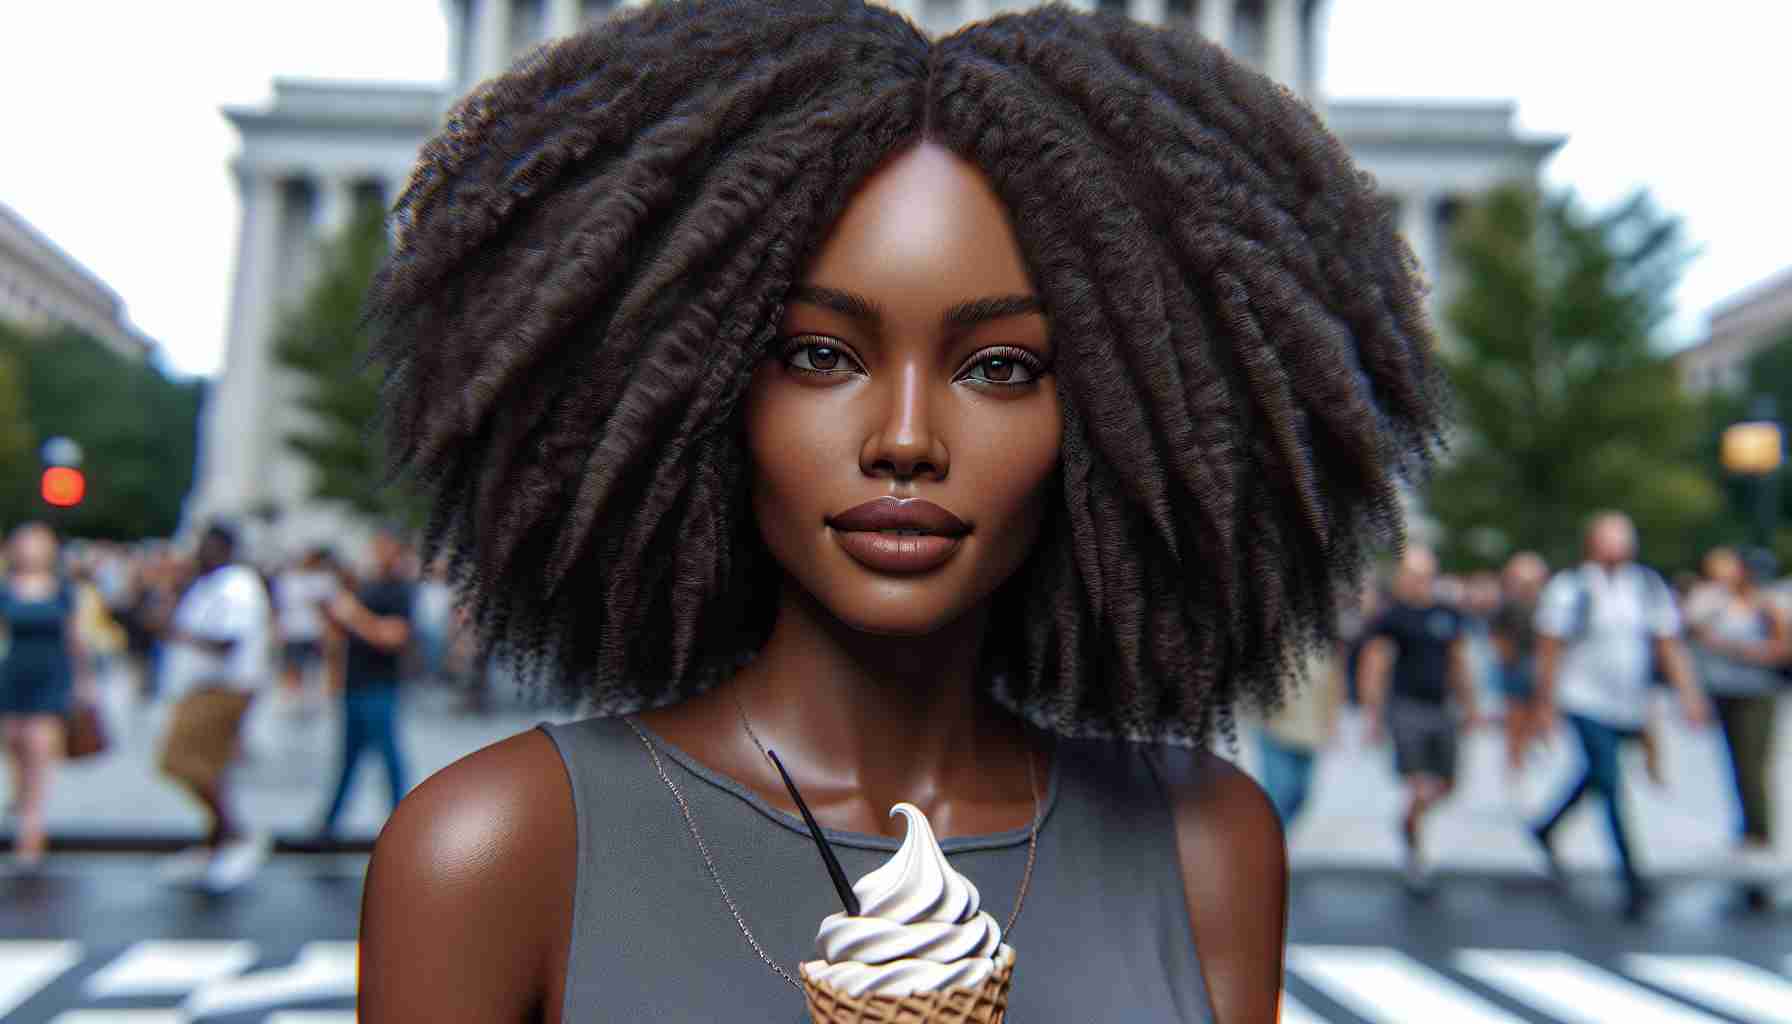 Realistic HD photo of a highly successful African-American female model, known for her ground-breaking work in the fashion industry, launching a unique ice cream experience in Washington, D.C.